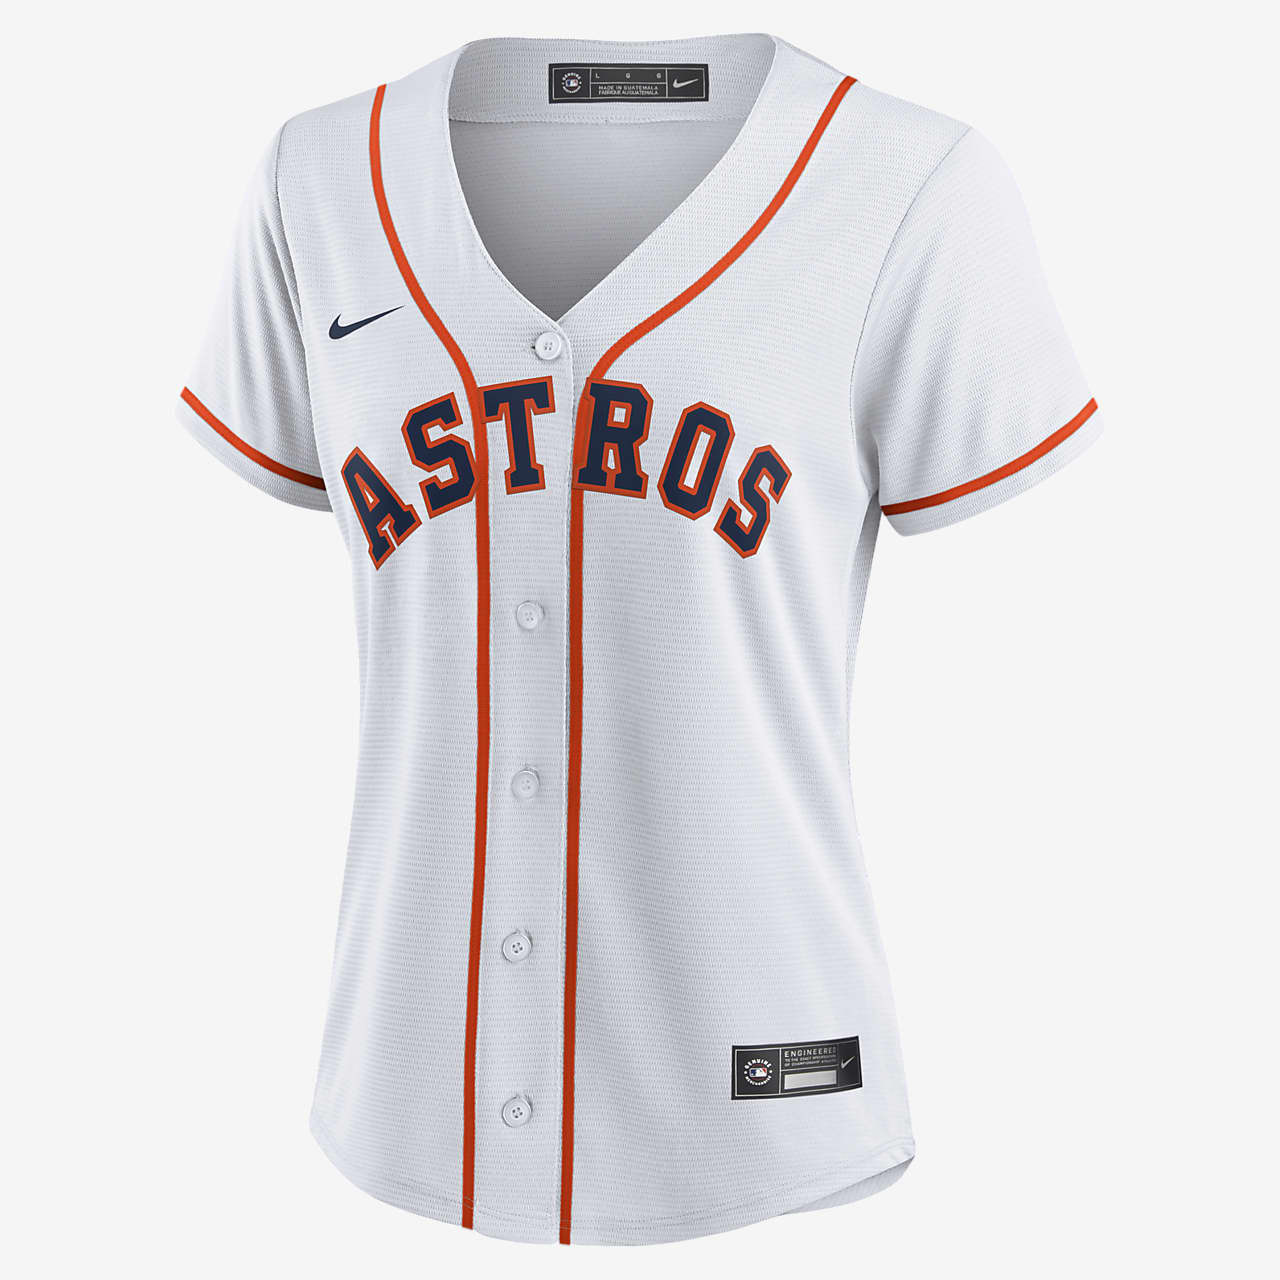 Women's Astros Mexico Baseball Limited Jersey - All Stitched - Nebgift